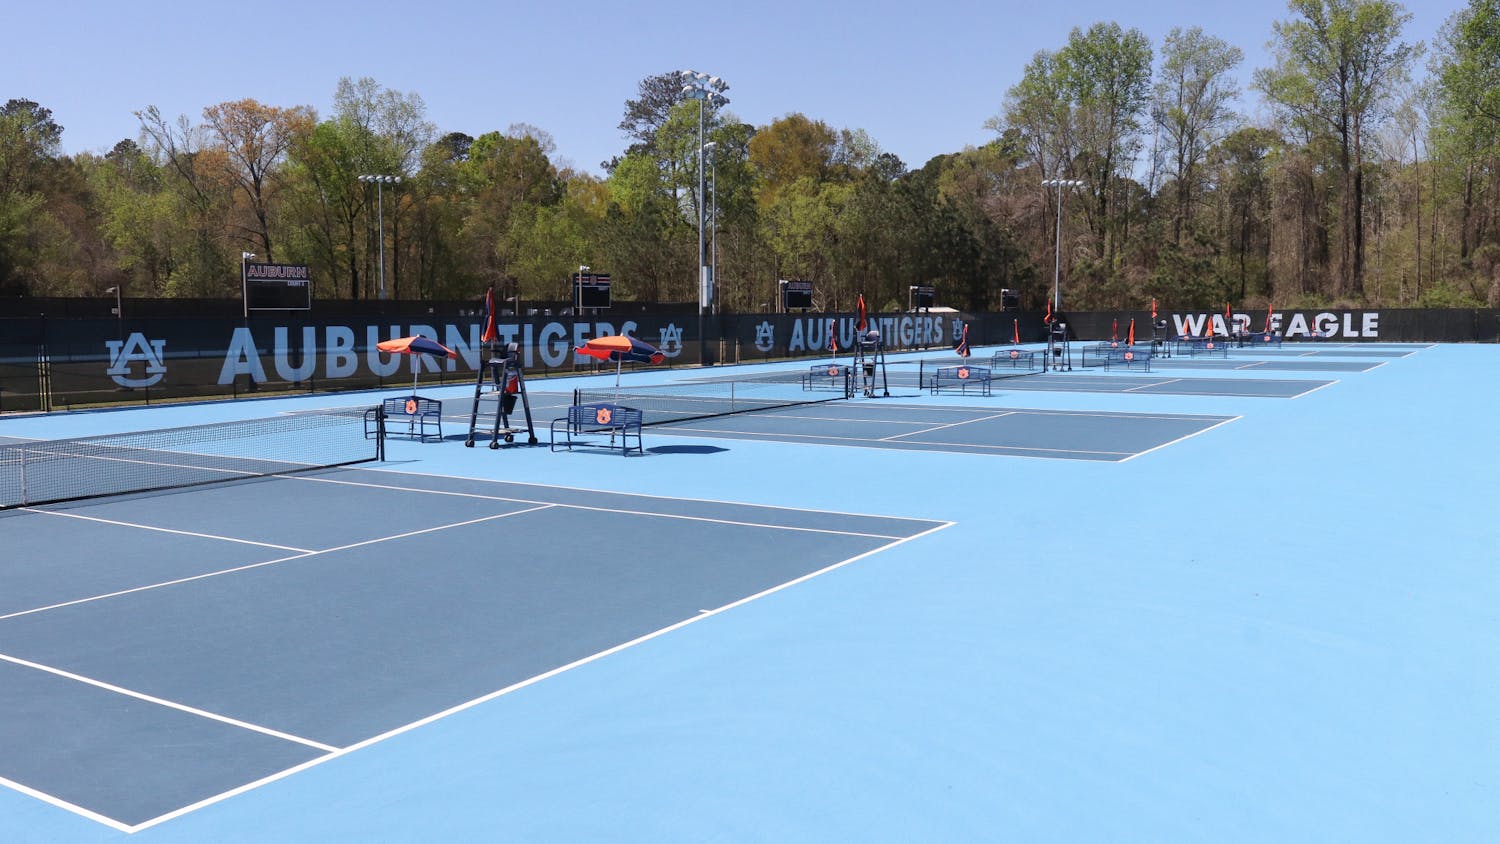 Auburn Tennis Courts at Yarbrough